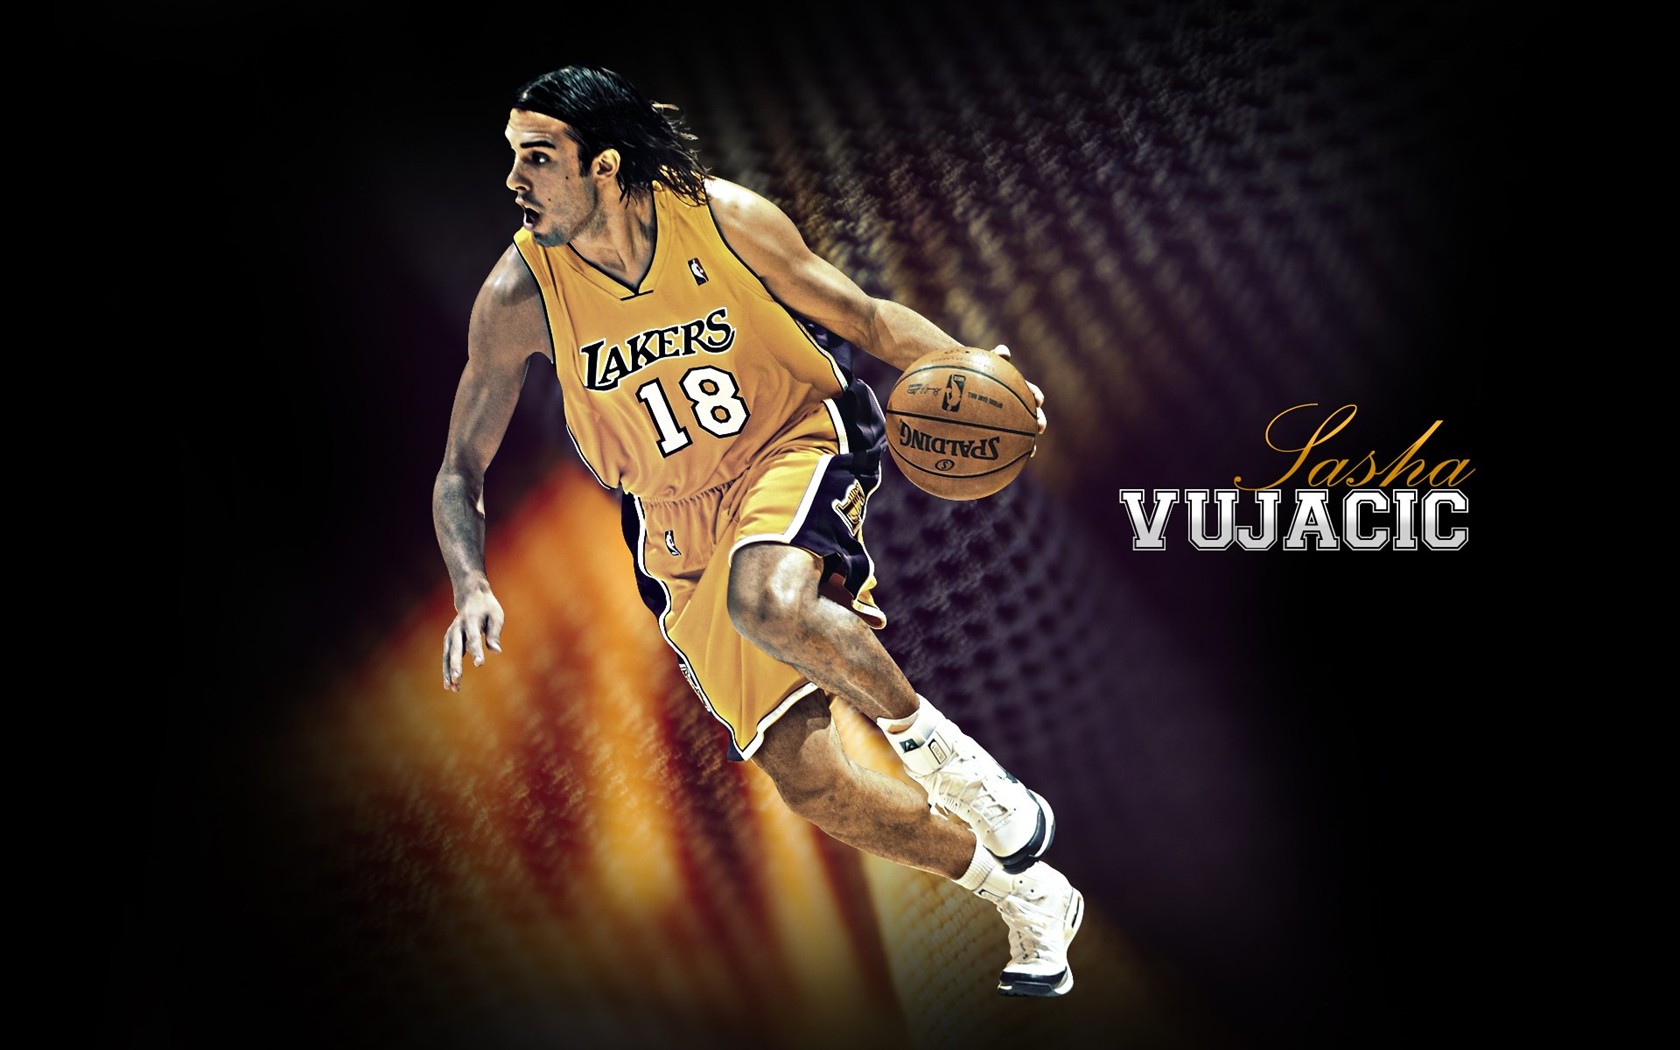 Los Angeles Lakers Wallpaper Oficial #22 - 1680x1050